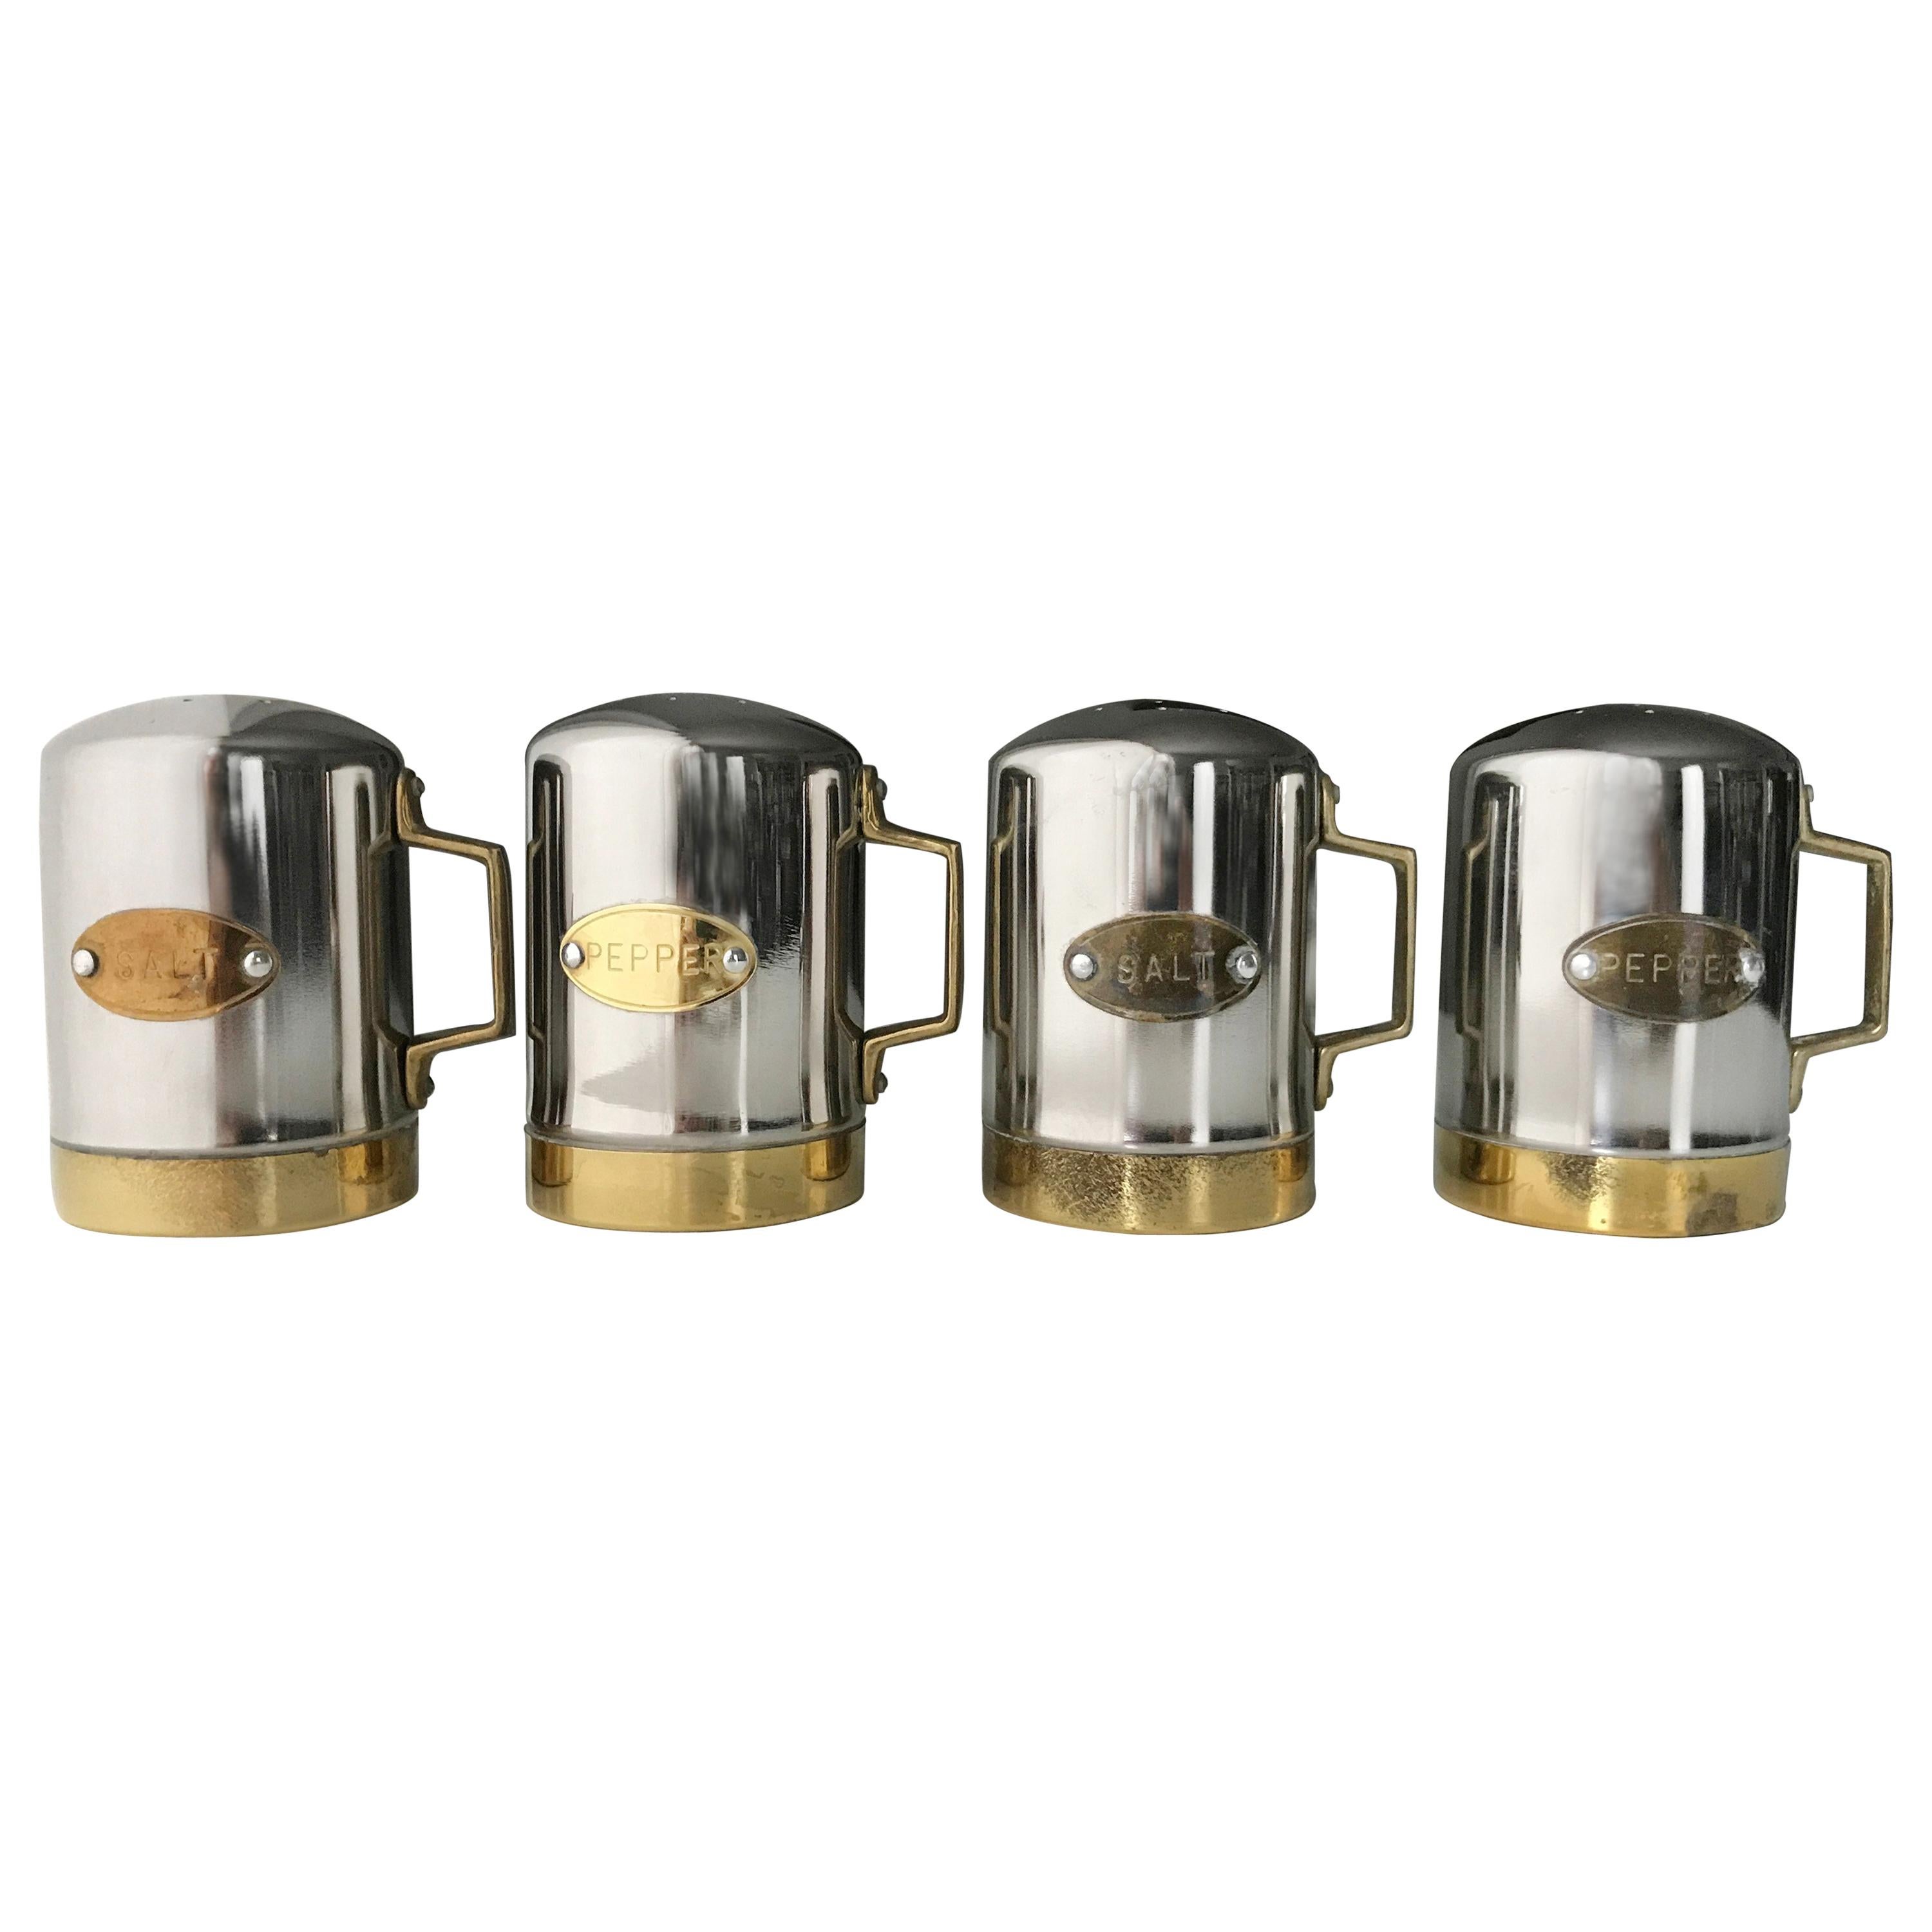 Salt and Pepper Space Age Vintage Diner Set, 1960s Chrome and Brass For Sale